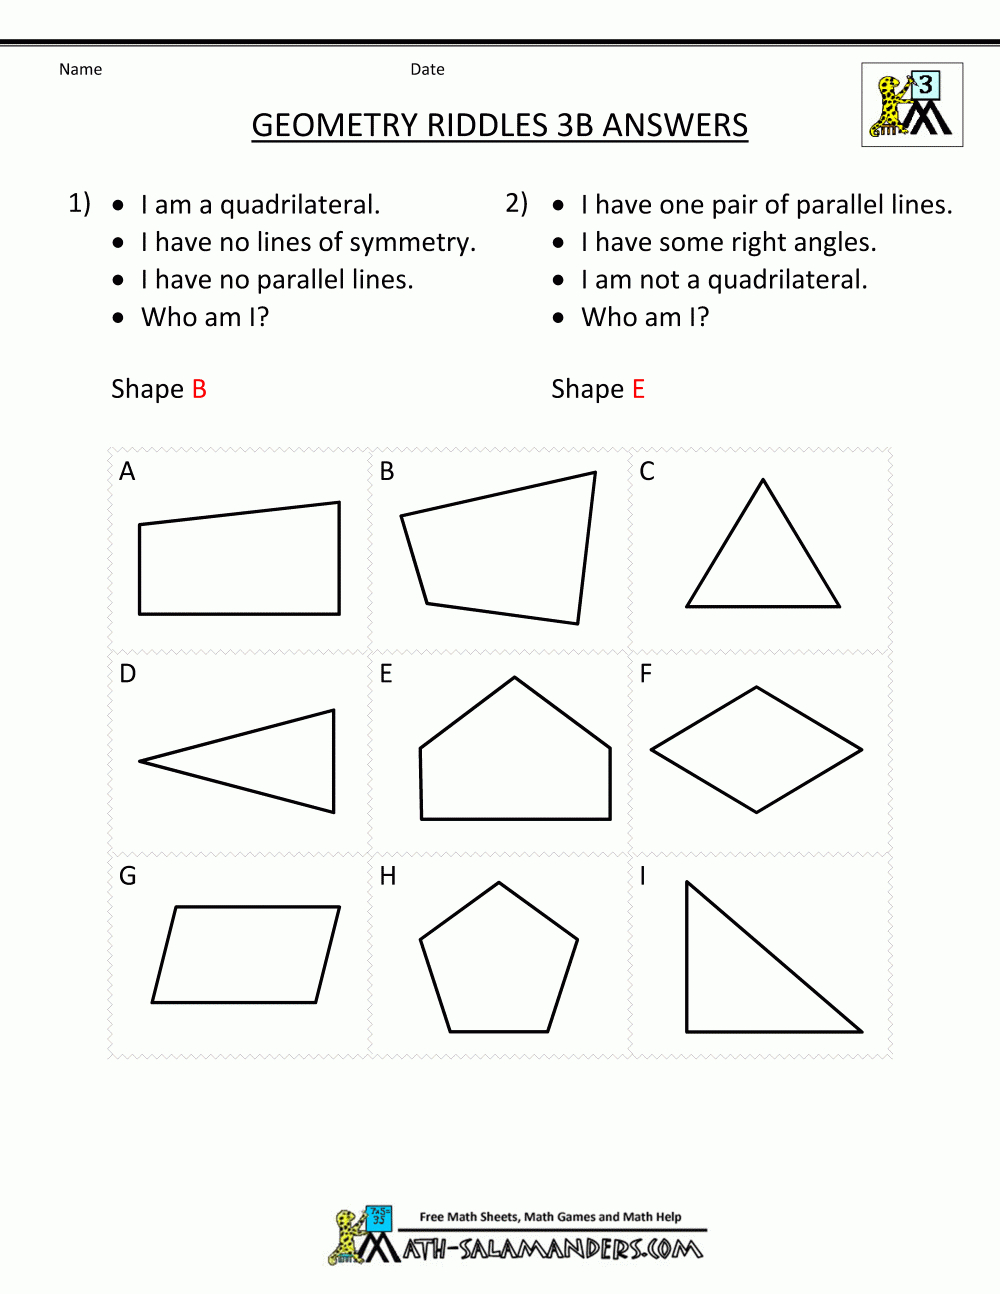 Printable Geometry Worksheets - Riddles - Free Printable Riddles With Answers